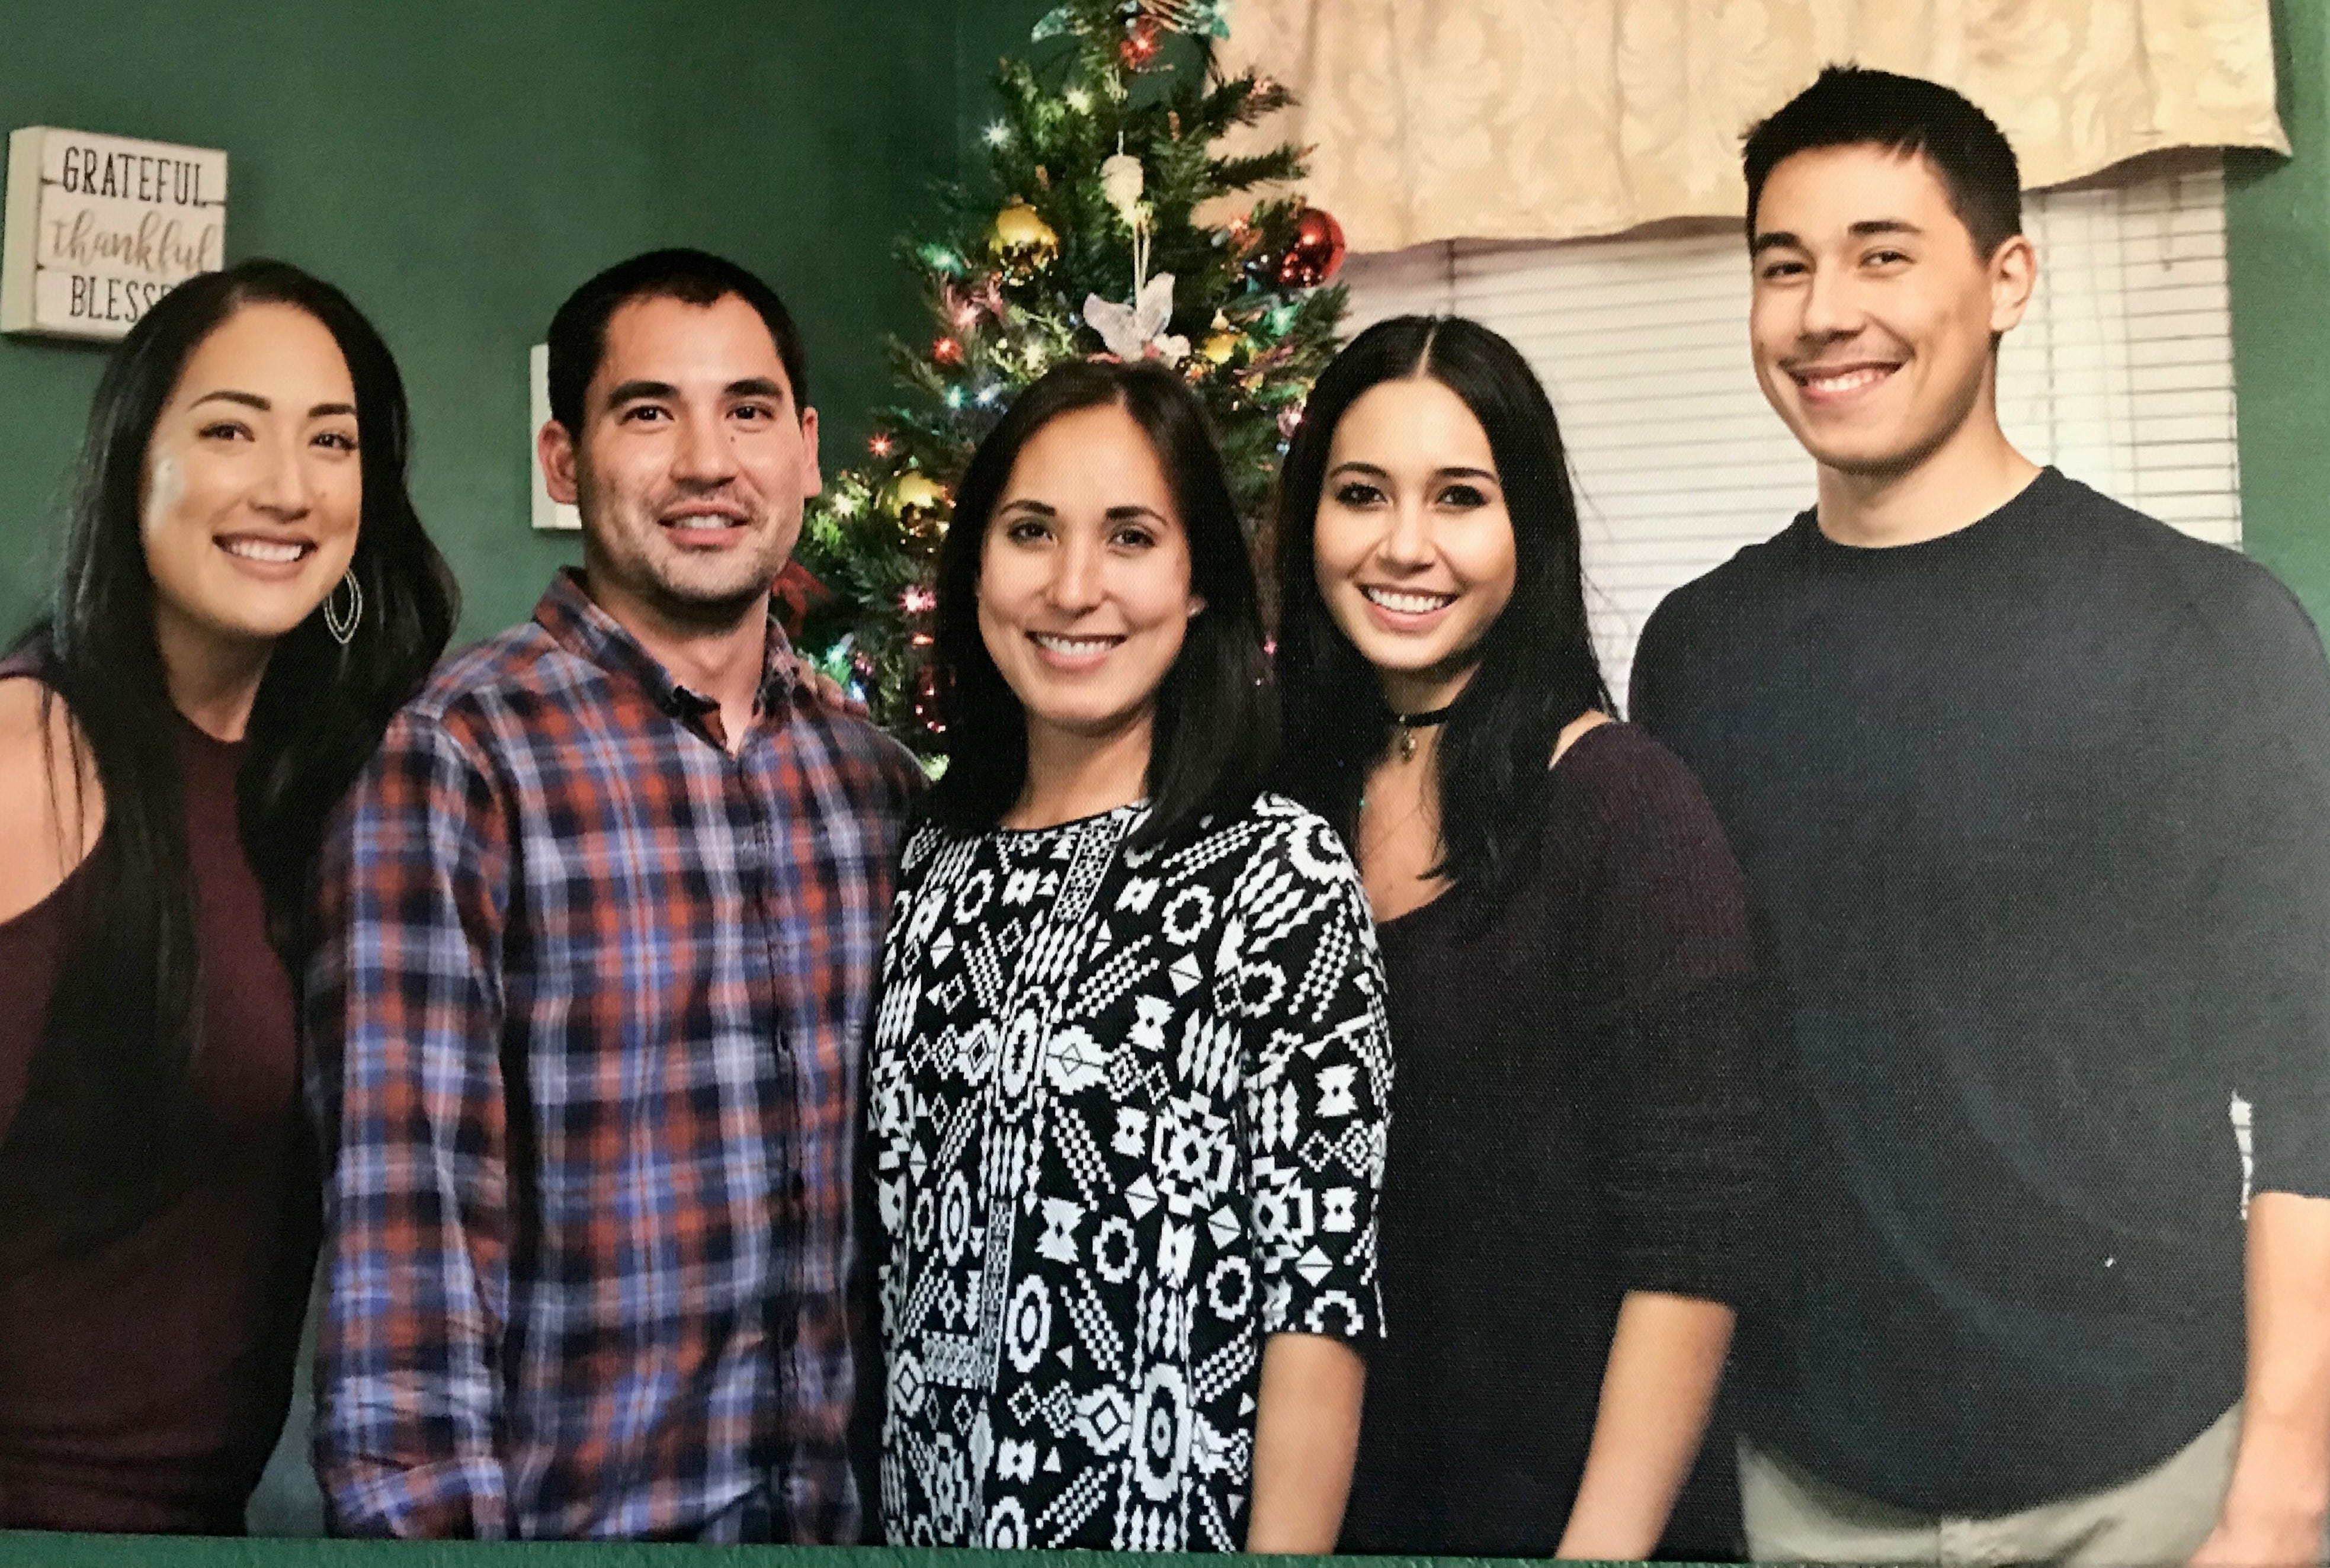 John David Adena, wearing a flannel shirt, poses with his siblings for a Christmas picture.